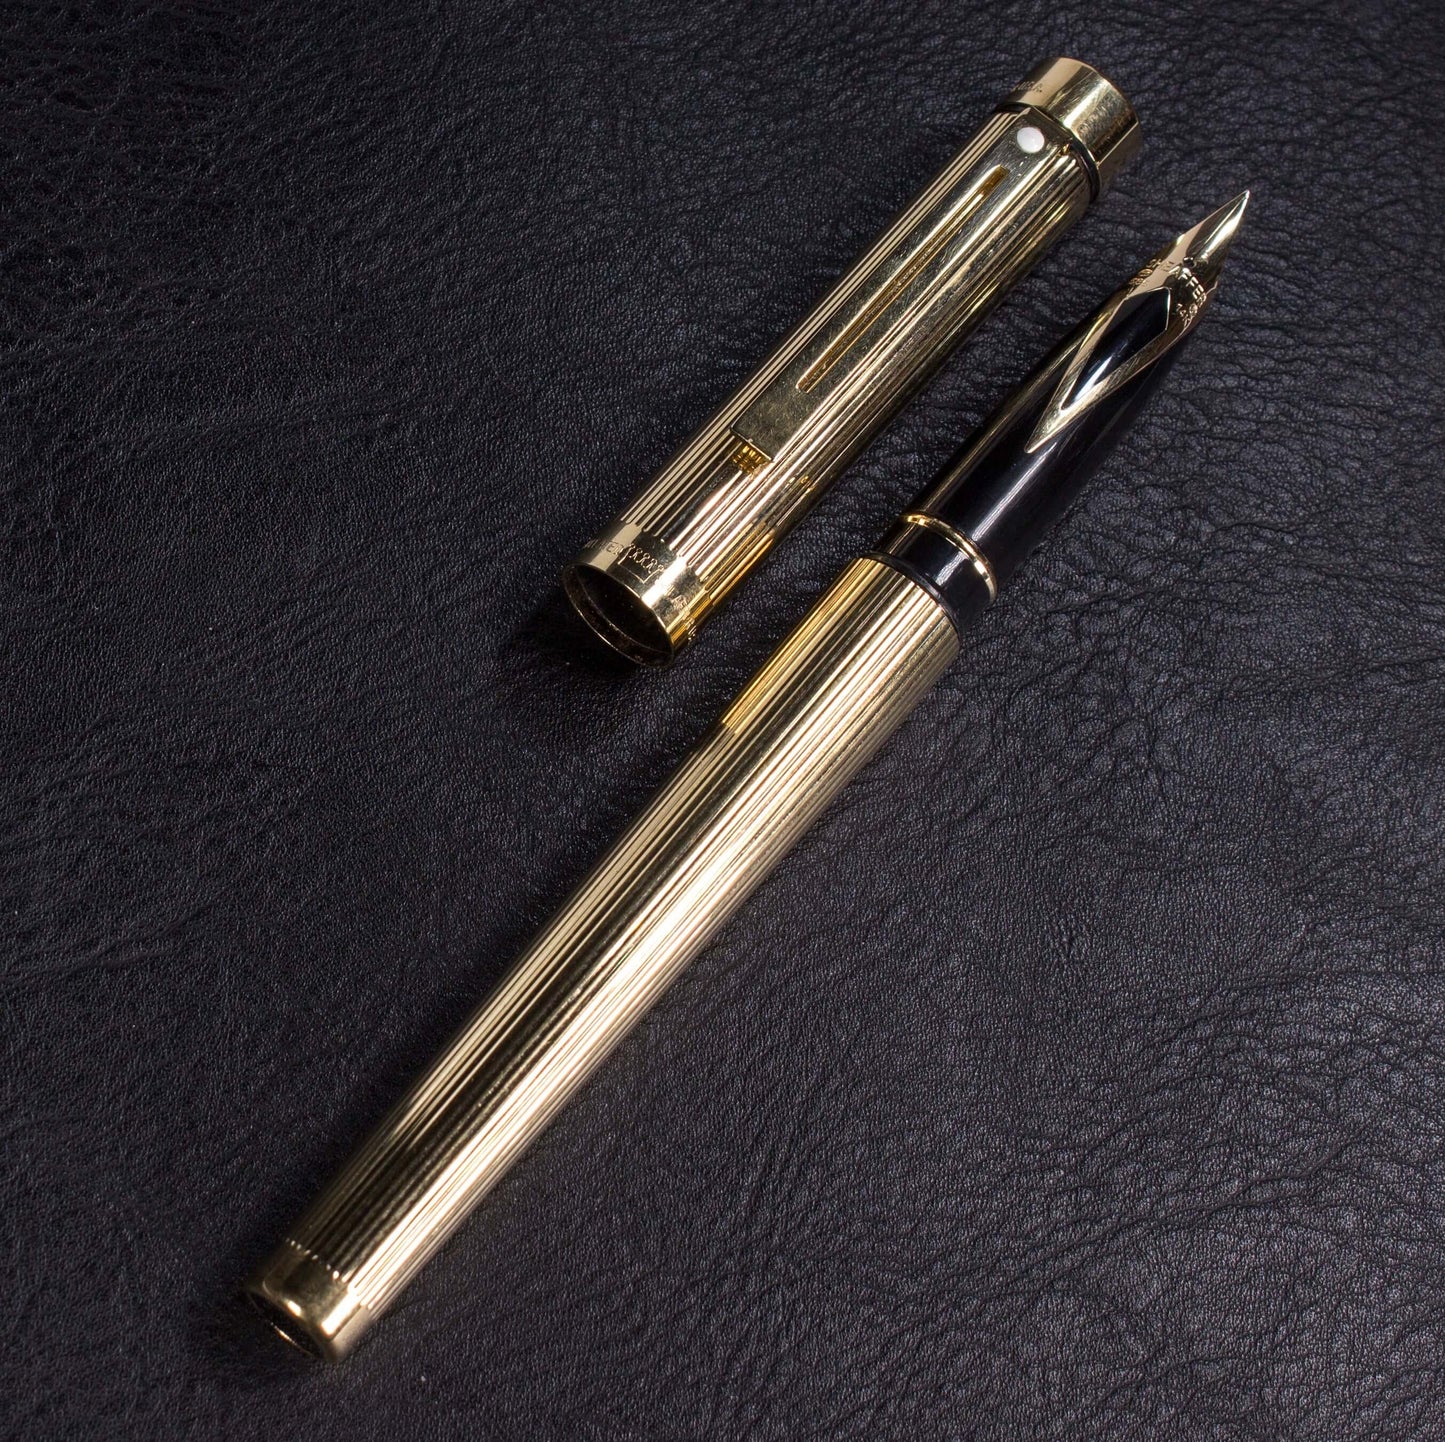 ${titleName/Type: Sheaffer Targa Manufacture Year: 1980's Length: 5 5/16 Filling System: Sheaffer Cartridges or Converter Color/Pattern: Gold Plated Lined Pattern Nib Type/Condition and remarks: Medium 14K inlaid nib. Condition: ﻿Excellent Condition no de